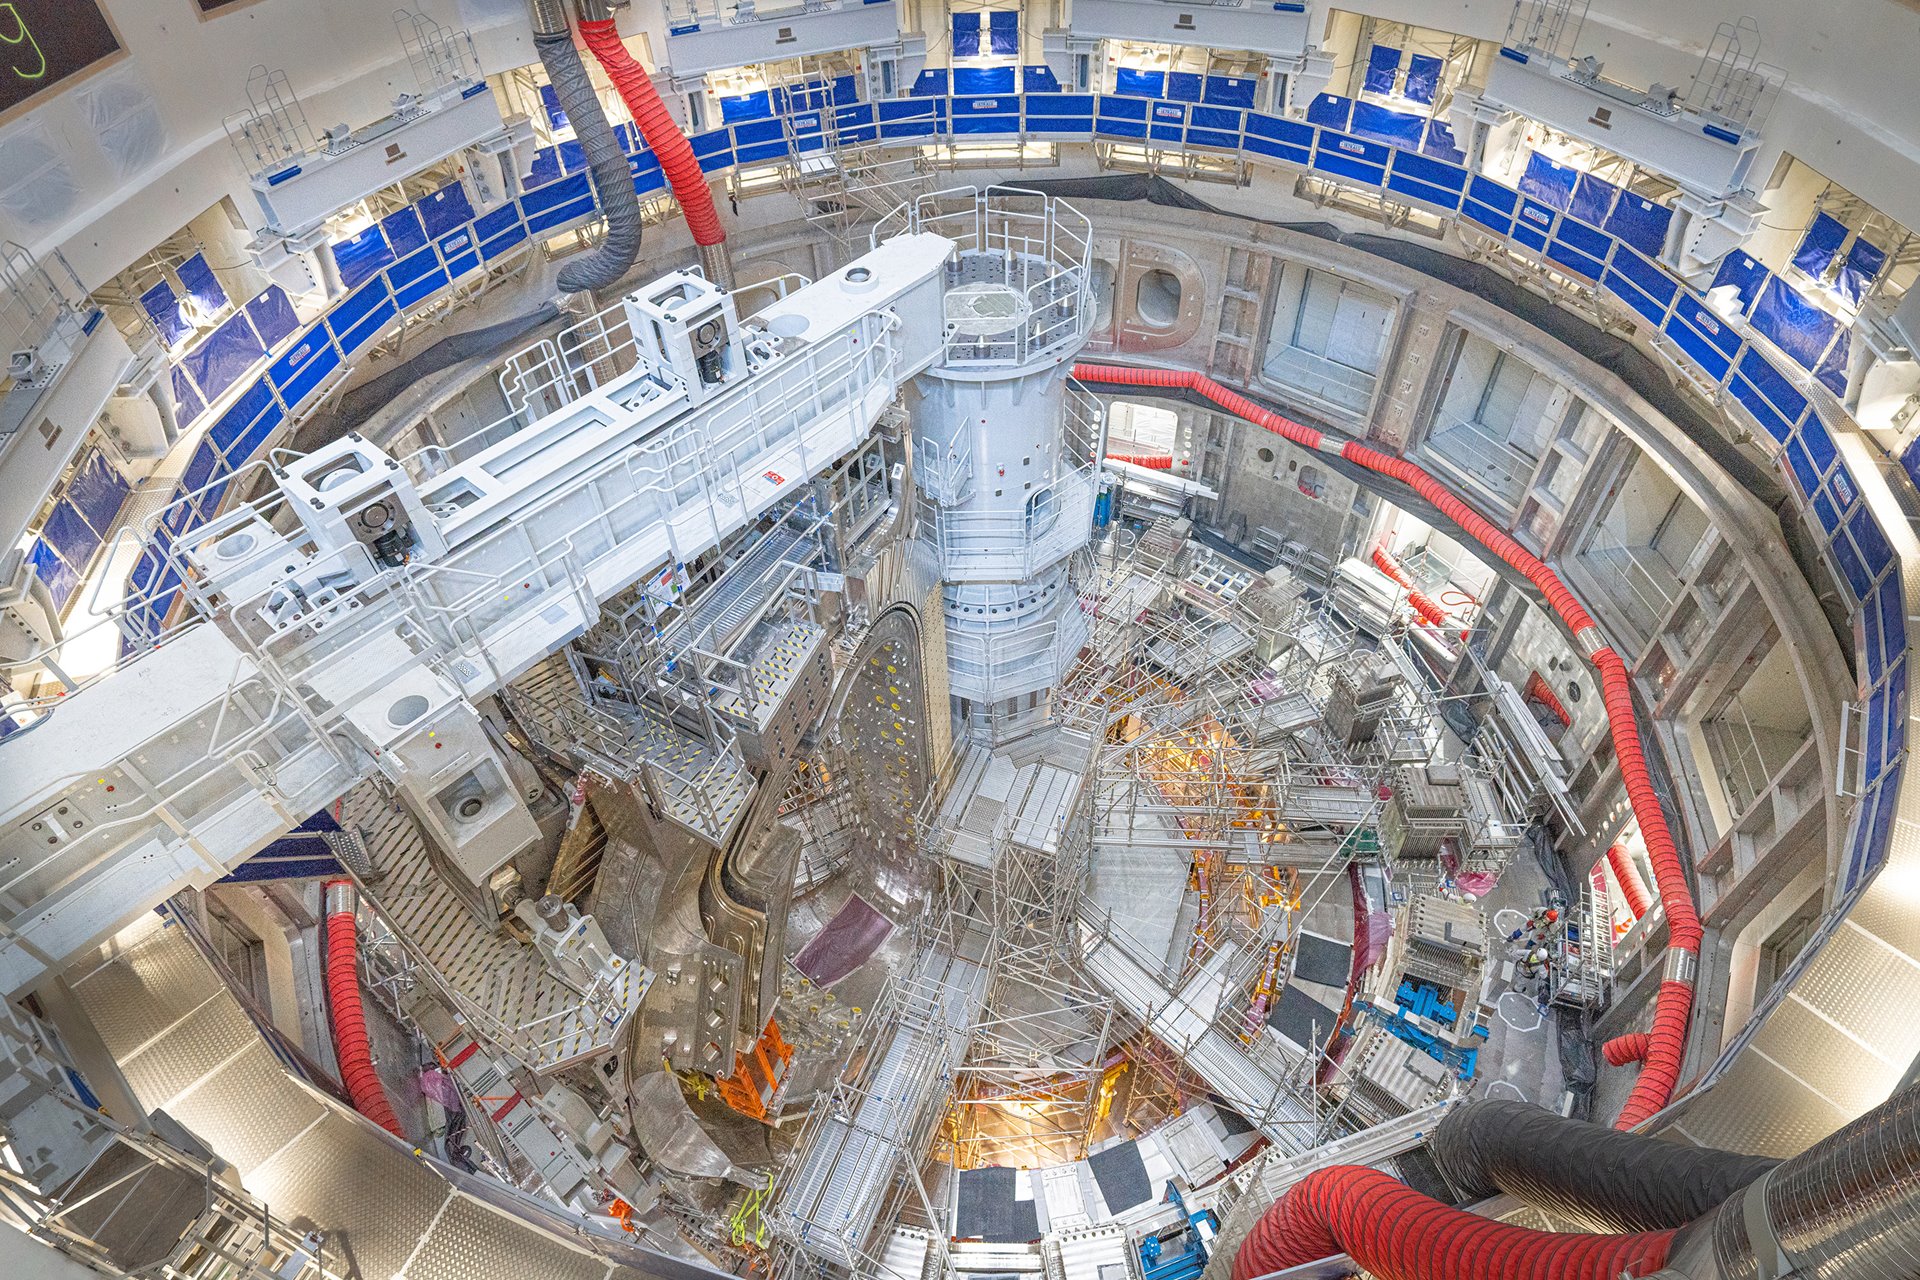 A tokamak nuclear fusion pit is under construction in Saint-Paul-lez-Durance, France. The tokamak is an experimental magnetic fusion device, designed to harness energy produced on the principle that powers the sun and stars. The aim of this 35-nation collaboration is that energy produced through the fusion of atoms will be absorbed as heat in the walls of the vessel, then used to produce steam and thence electricity by way of turbines and generators.&nbsp;